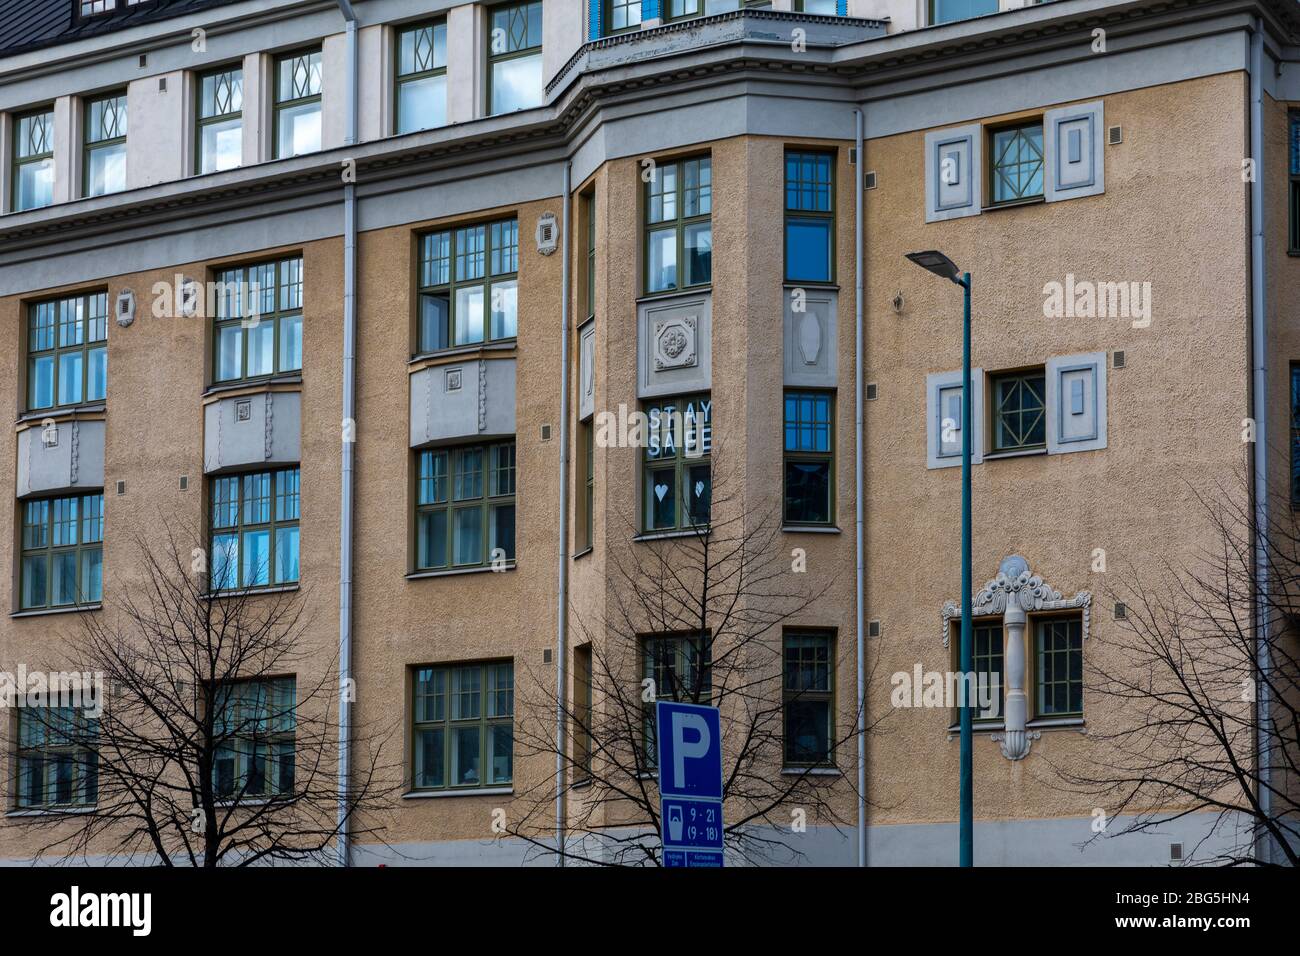 People in Finland are supporting each other in social distancing. 'Stay safe' is written in window downtown Helsinki. Stock Photo